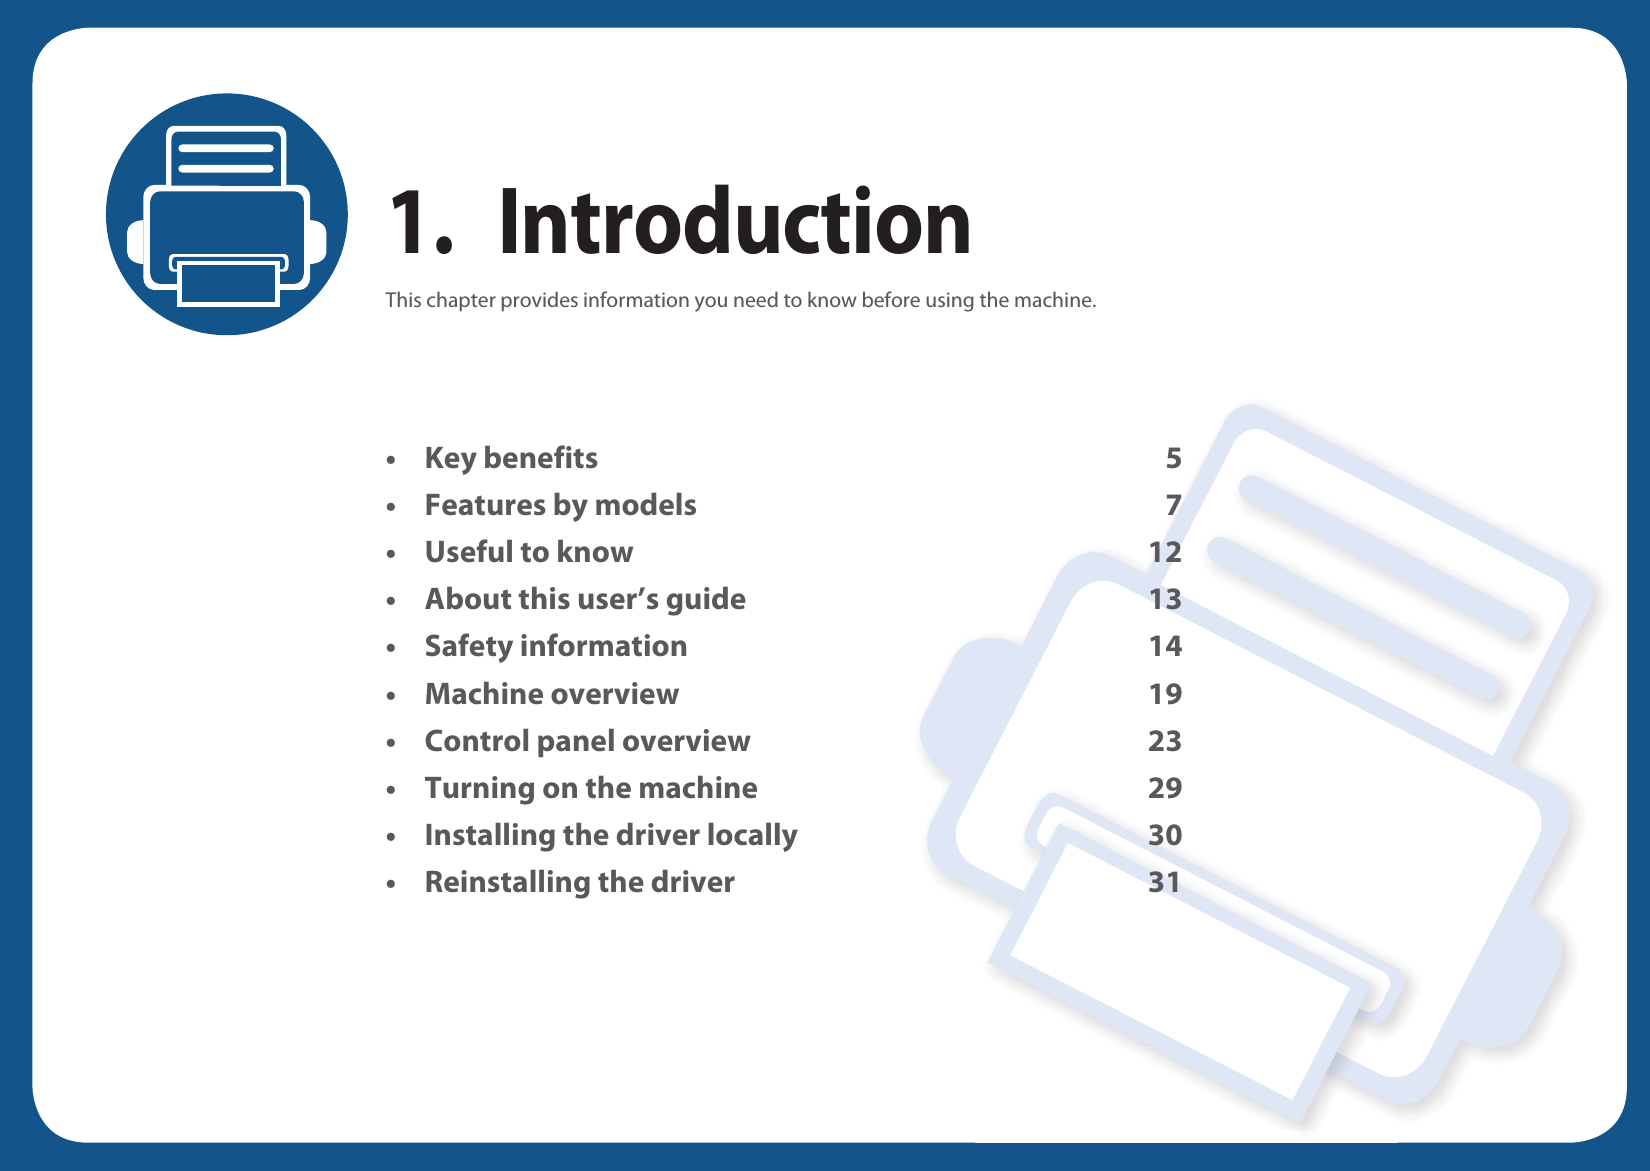 1. IntroductionThis chapter provides information you need to know before using the machine.•Key benefits 5• Features by models 7• Useful to know 12• About this user’s guide 13• Safety information 14• Machine overview 19• Control panel overview 23• Turning on the machine 29• Installing the driver locally 30• Reinstalling the driver 31